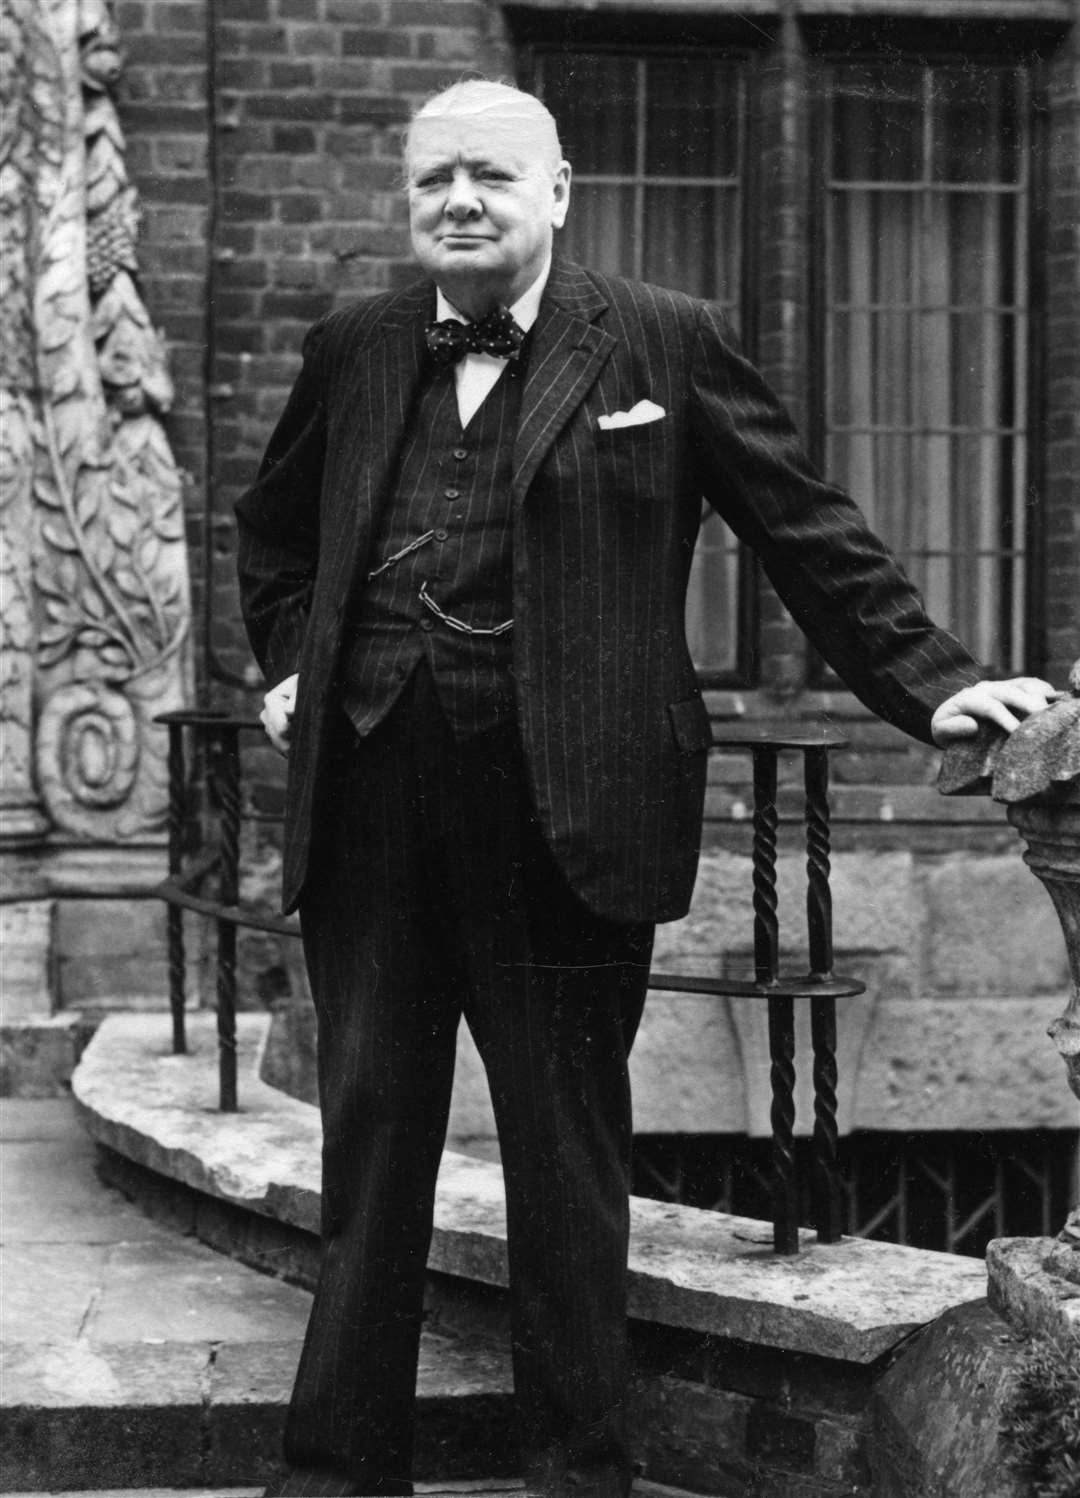 Winston Churchill: "An iron curtain has descended across the Continent." Picture: National Trust